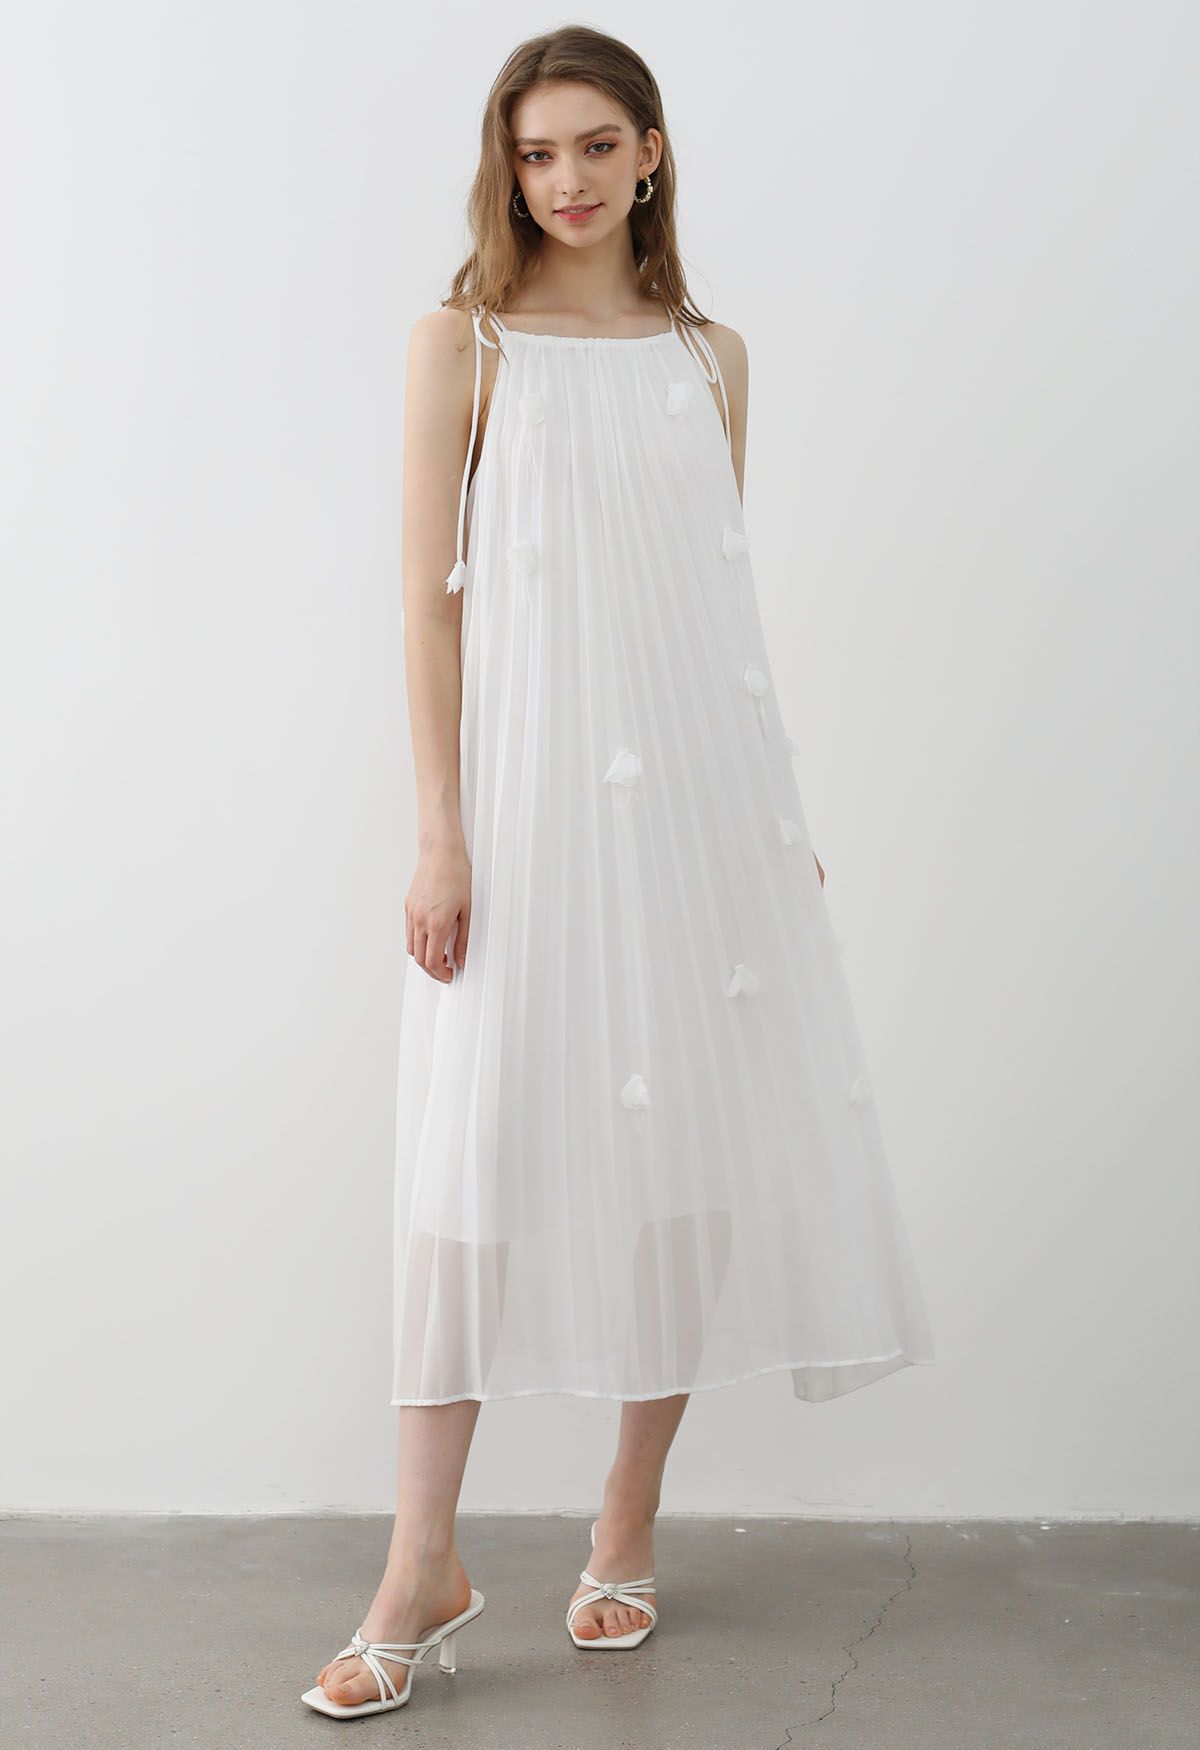 3D Floral Tie-Shoulder Chiffon Pleated Dress in White